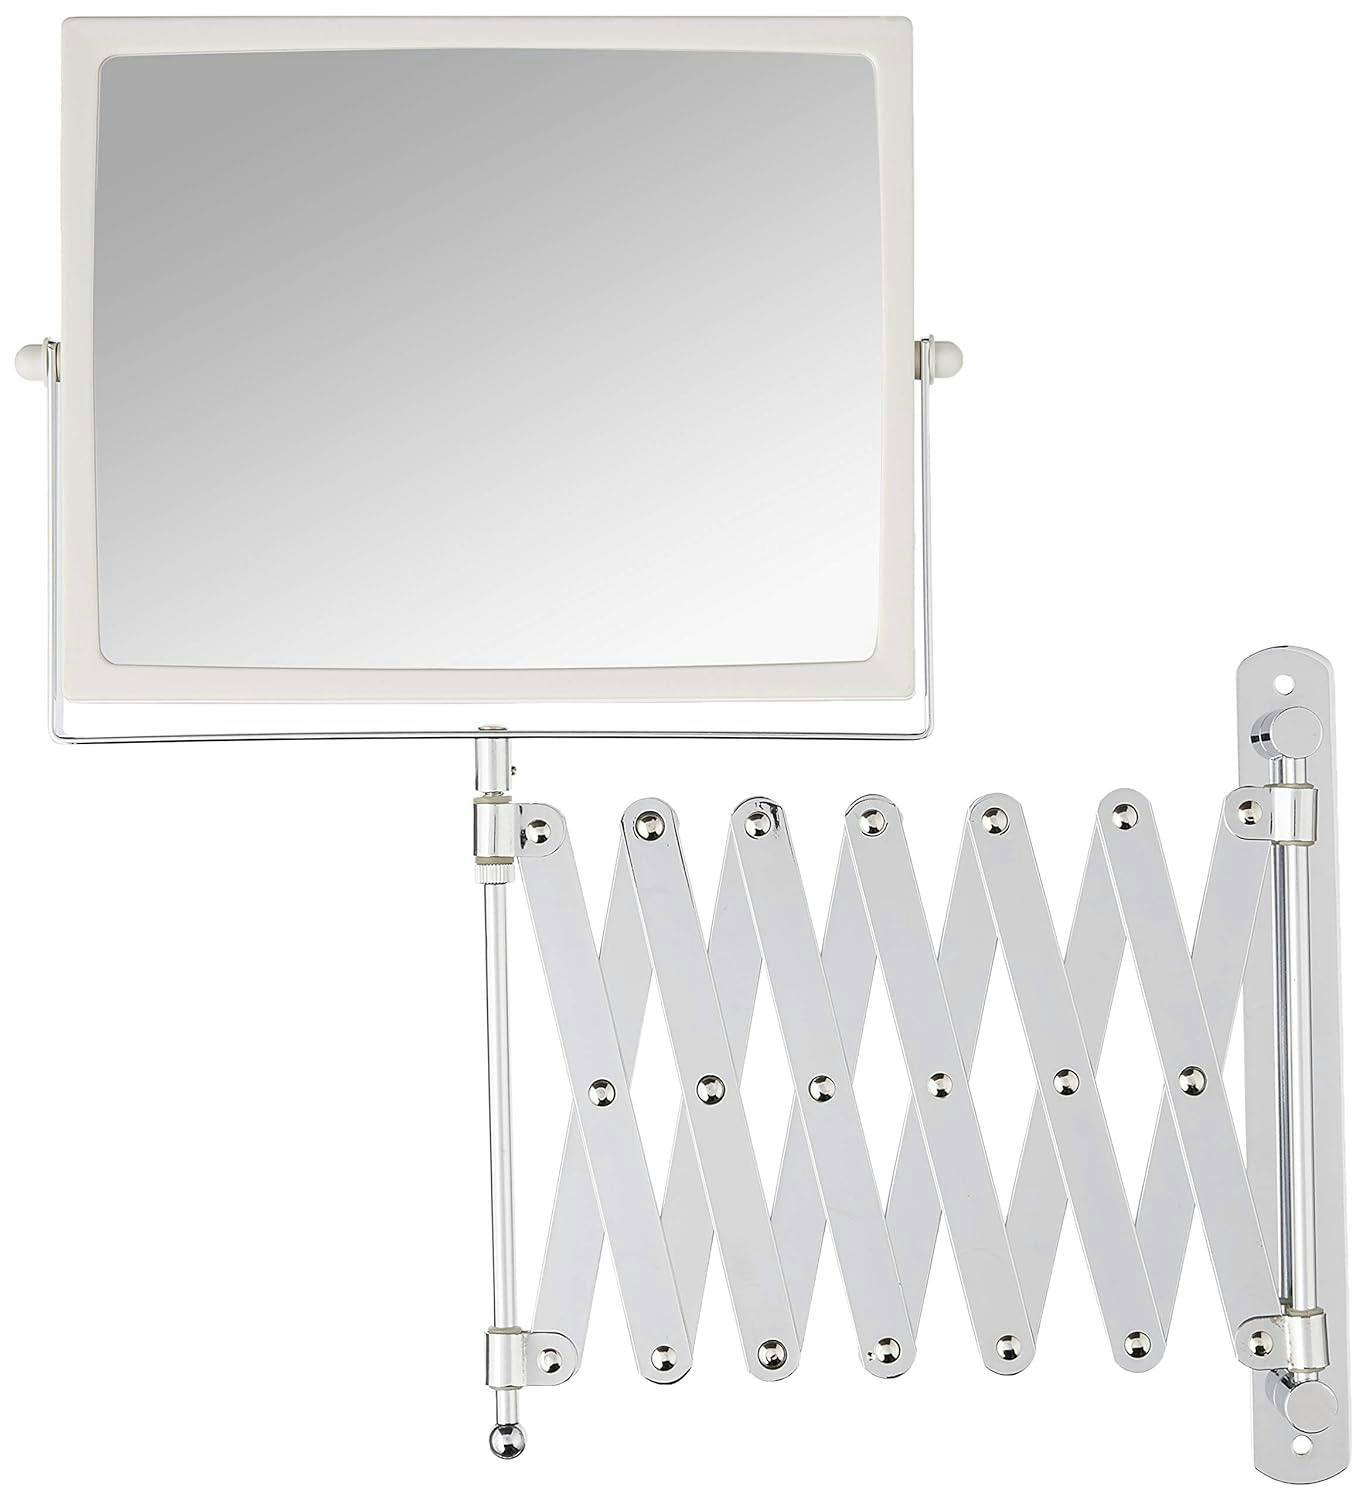 Elegant Wall-Mounted Rectangular Magnifying Mirror with Swivel Design, White and Chrome